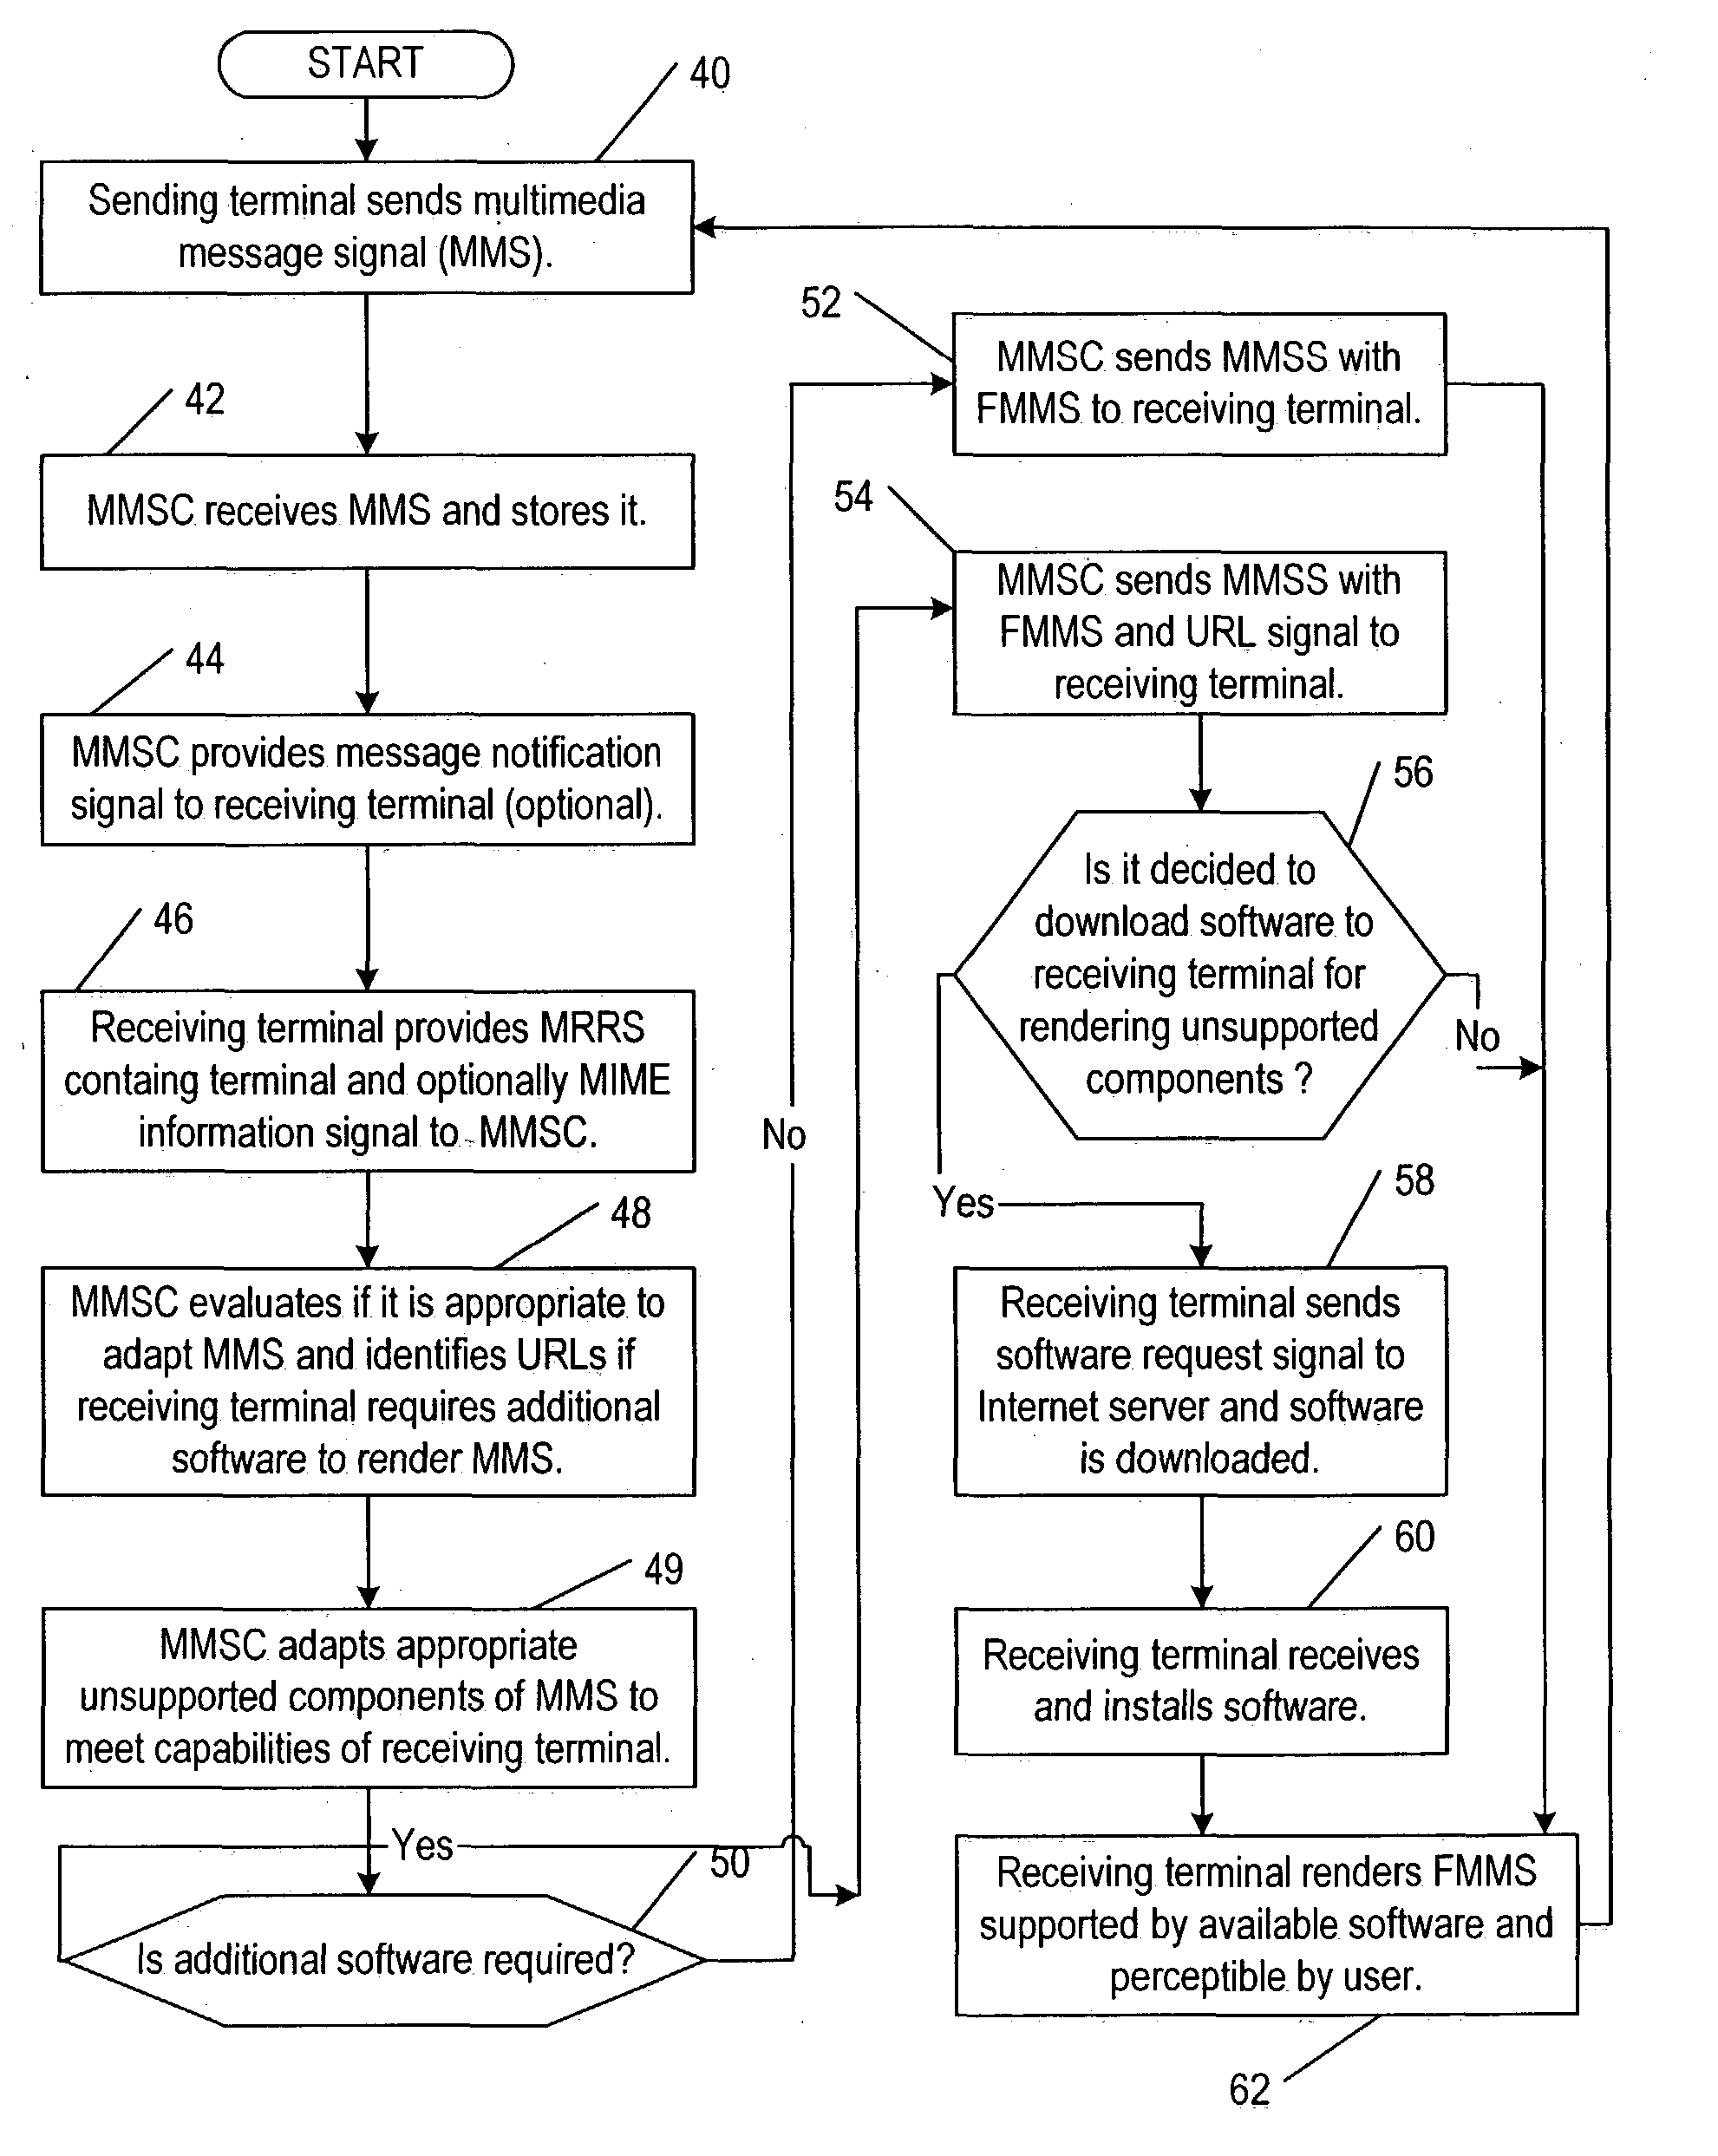 System for rendering multimedia messages by providing, in a multimedia message, URL for downloadable software to a receiving terminal